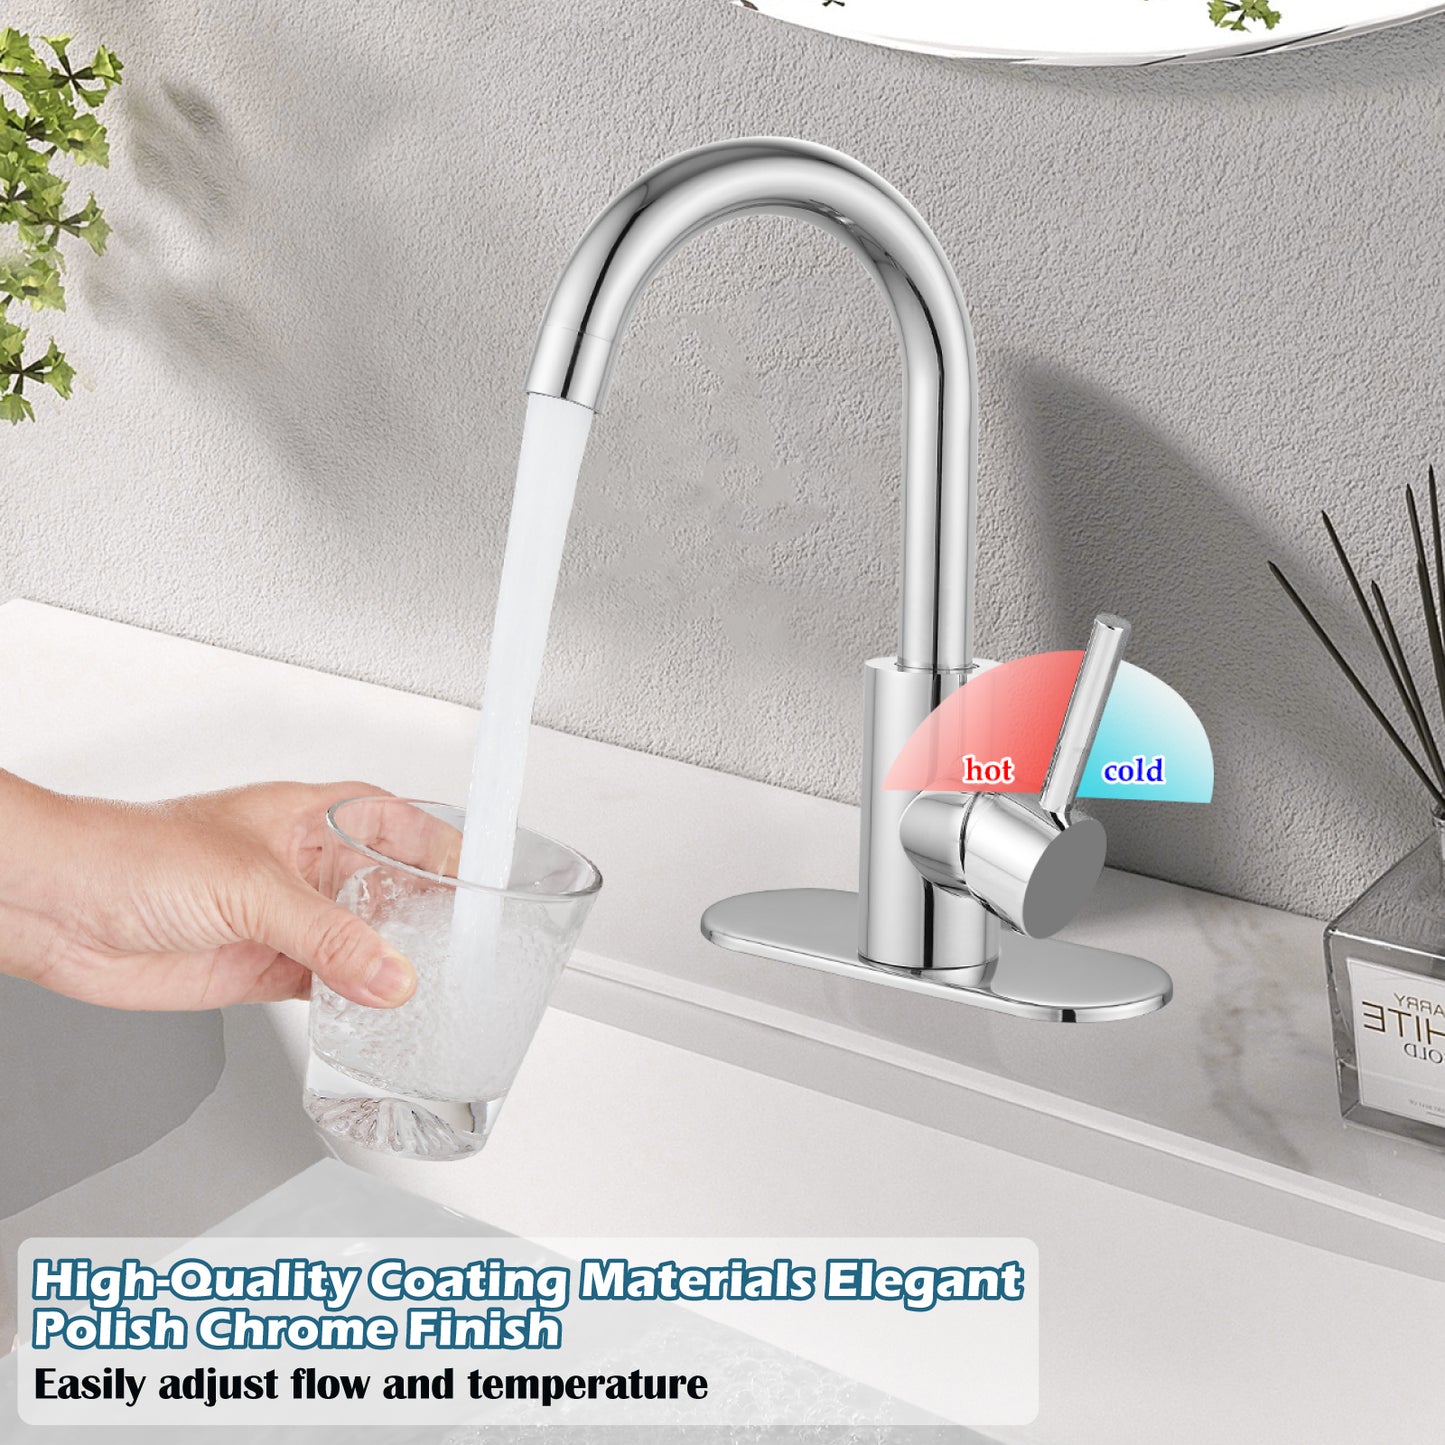 
                  
                    Midanya Single Handle Bathroom Sink Faucet, Wet Bar Pre-Kitchen Farmhouse RV Small Vanity Faucet with 360°Rotation Spout with Deck Plate, Supply Hoses and Drain Stopper
                  
                